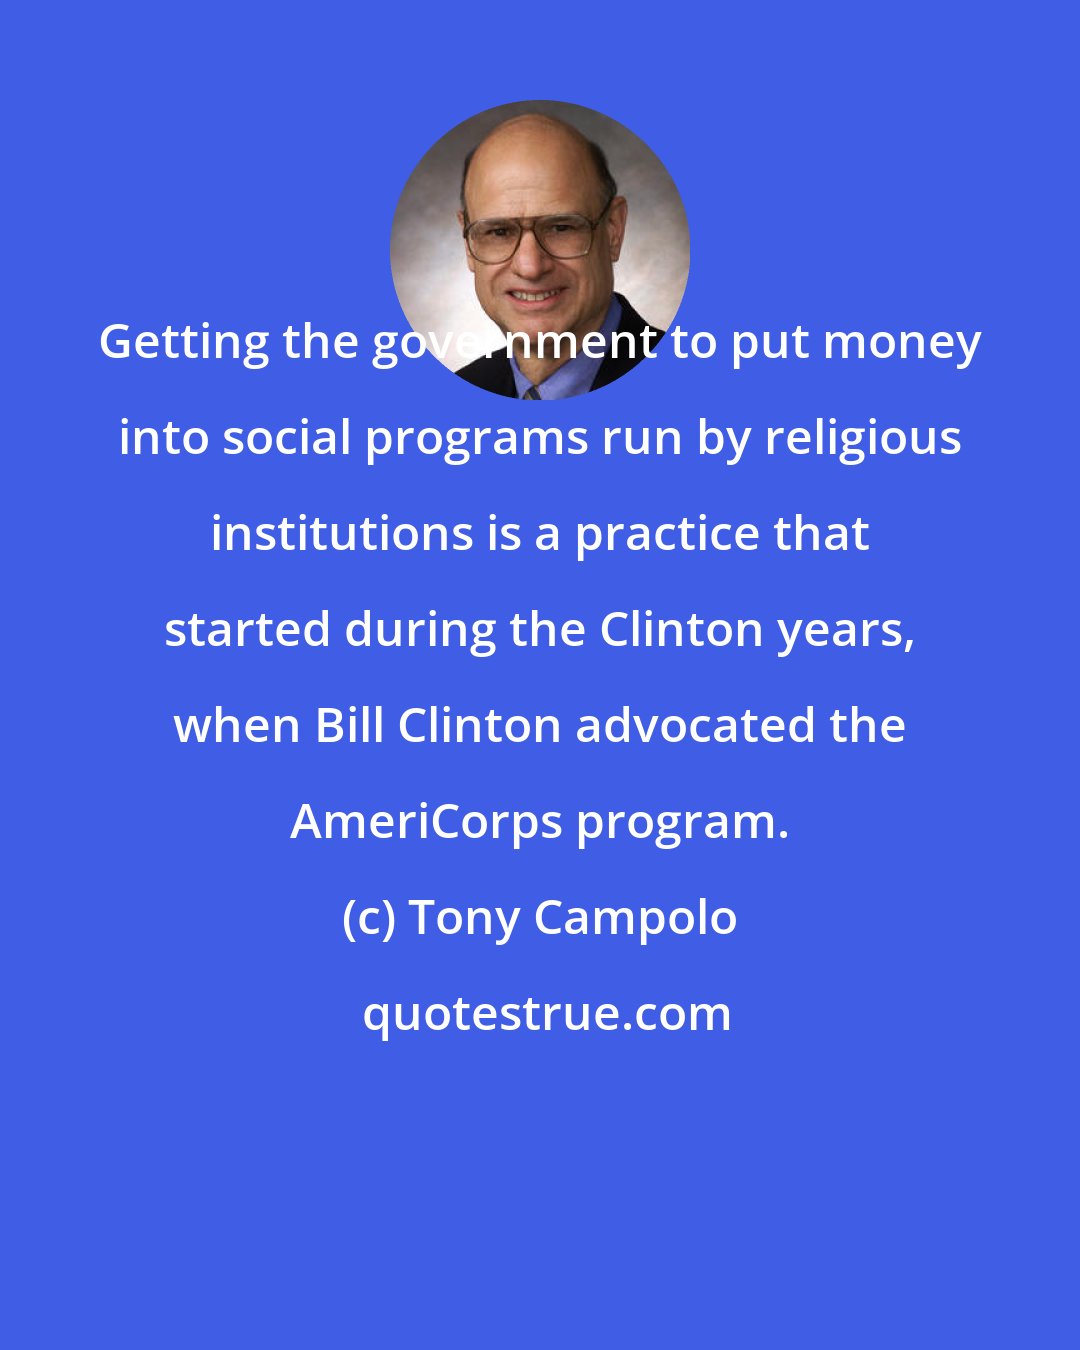 Tony Campolo: Getting the government to put money into social programs run by religious institutions is a practice that started during the Clinton years, when Bill Clinton advocated the AmeriCorps program.